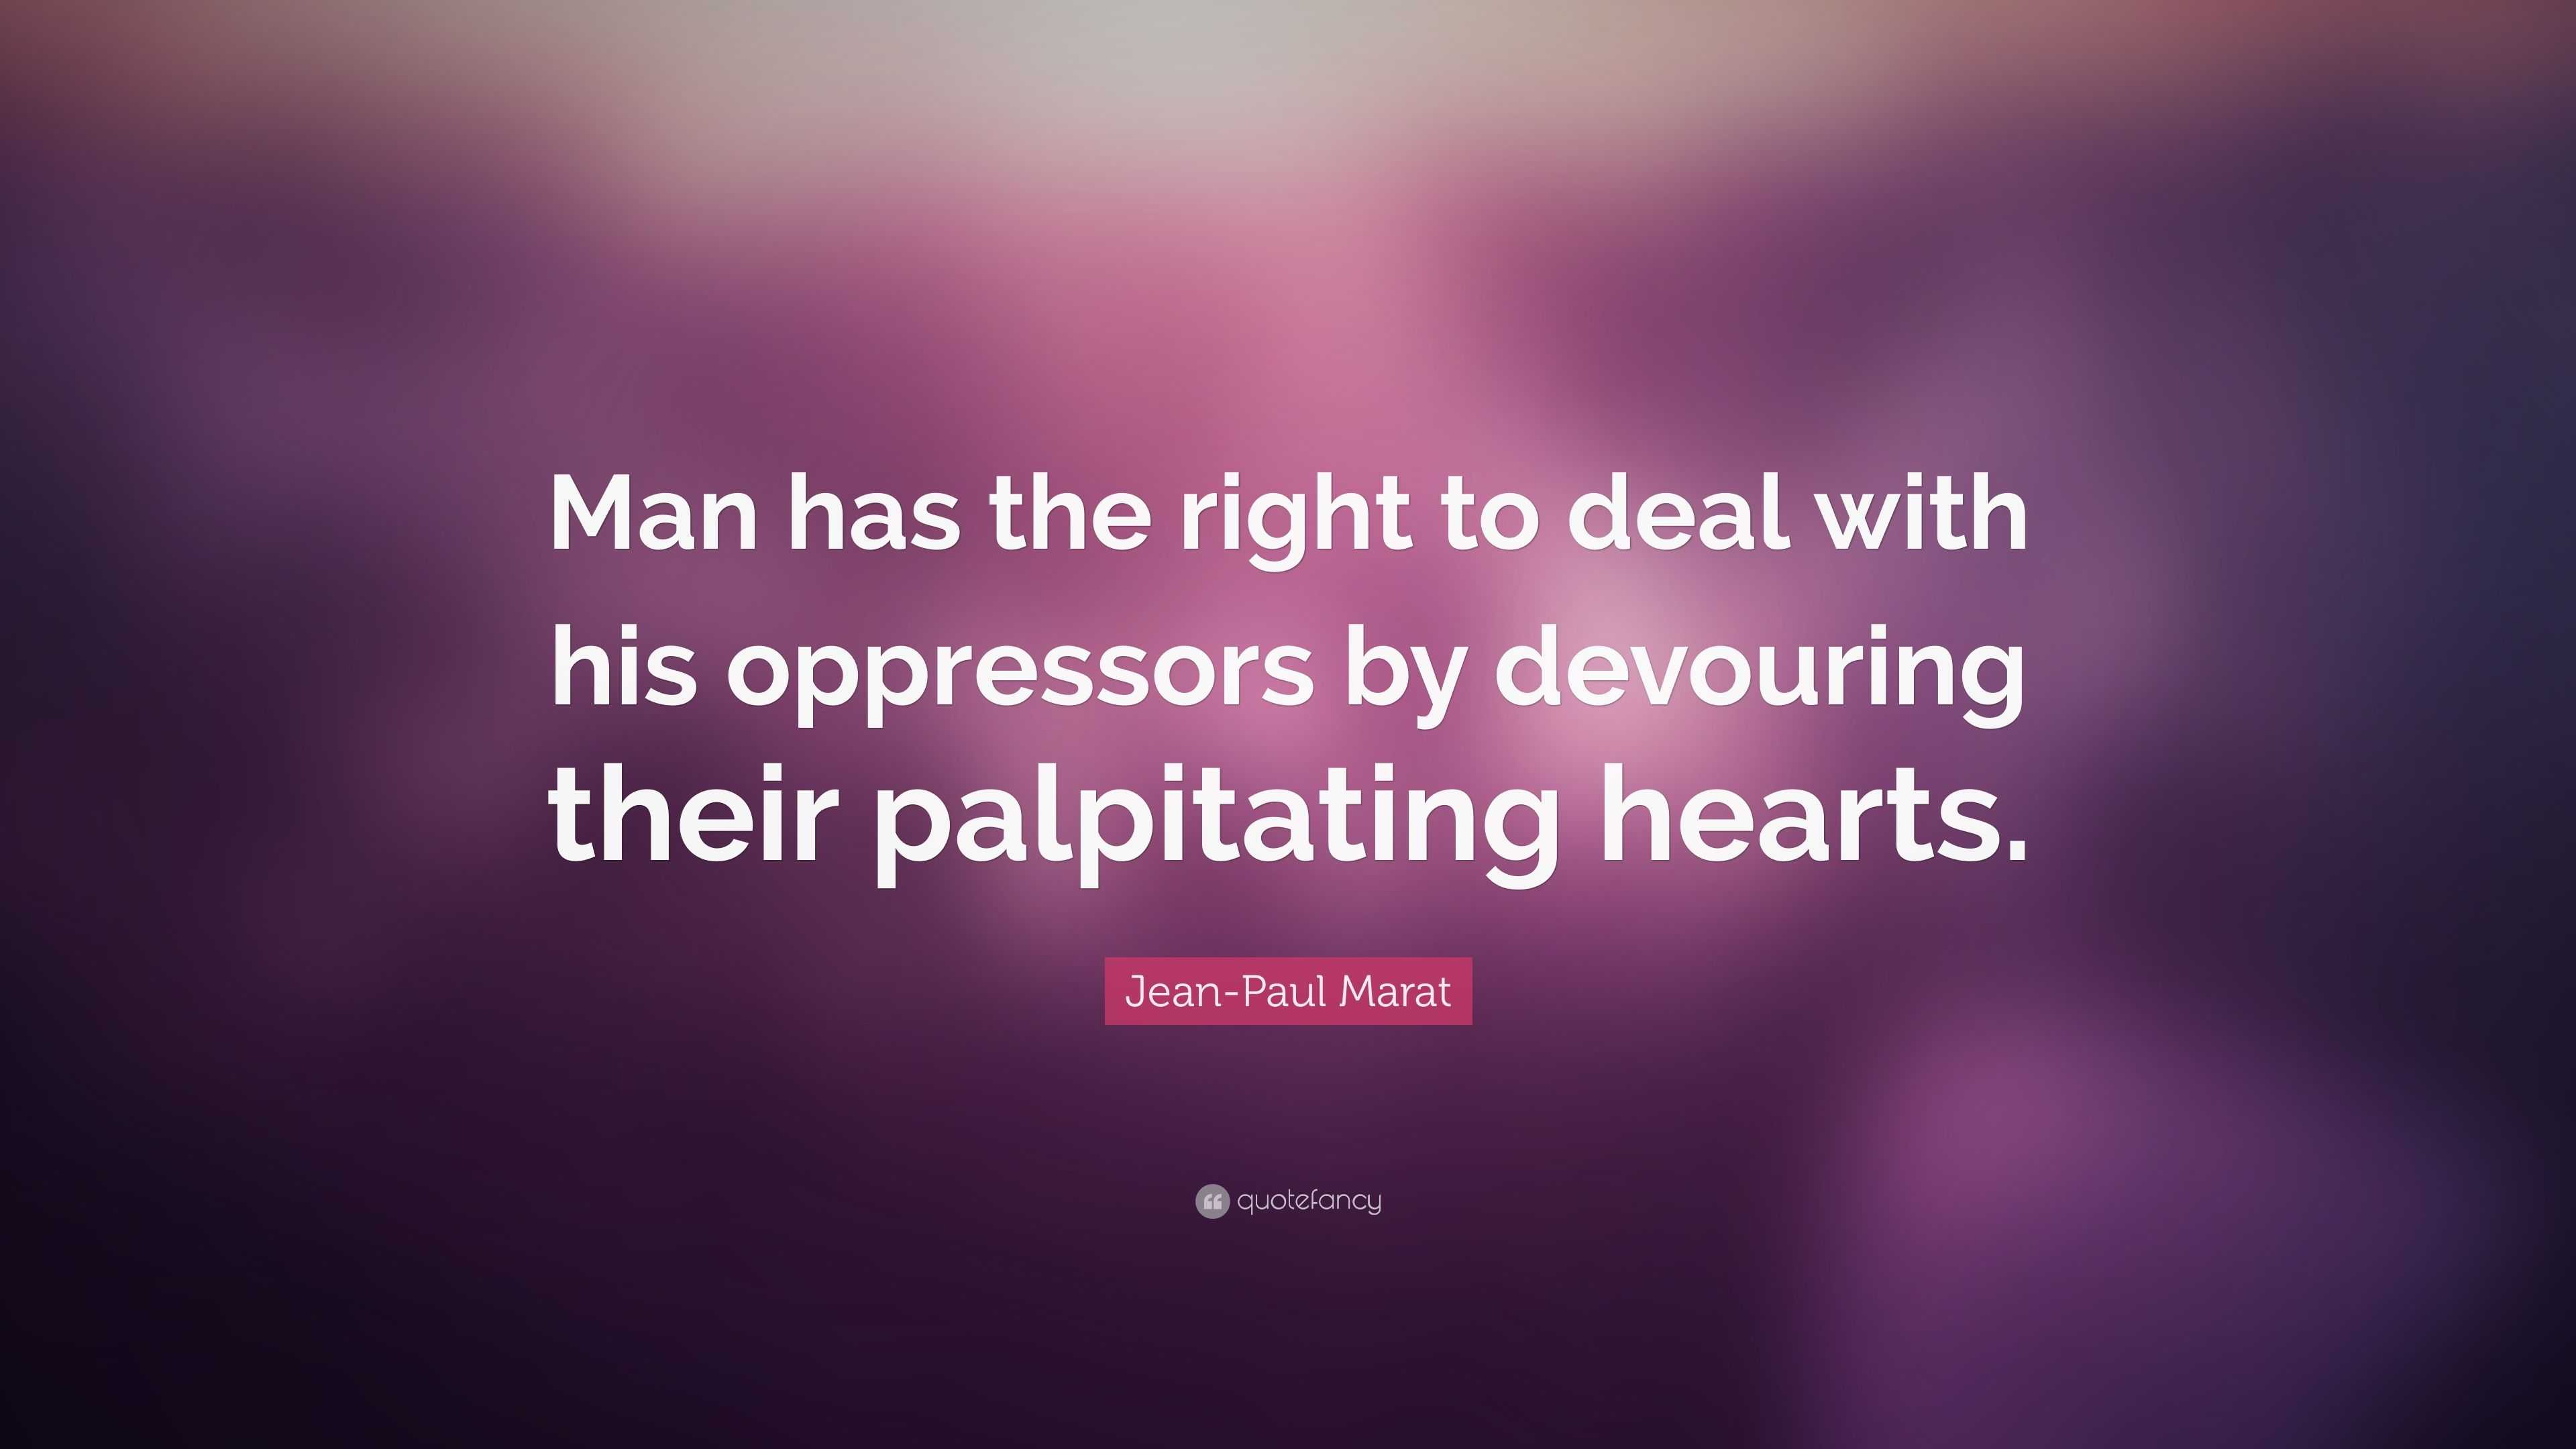 https://quotefancy.com/media/wallpaper/3840x2160/2399668-Jean-Paul-Marat-Quote-Man-has-the-right-to-deal-with-his.jpg